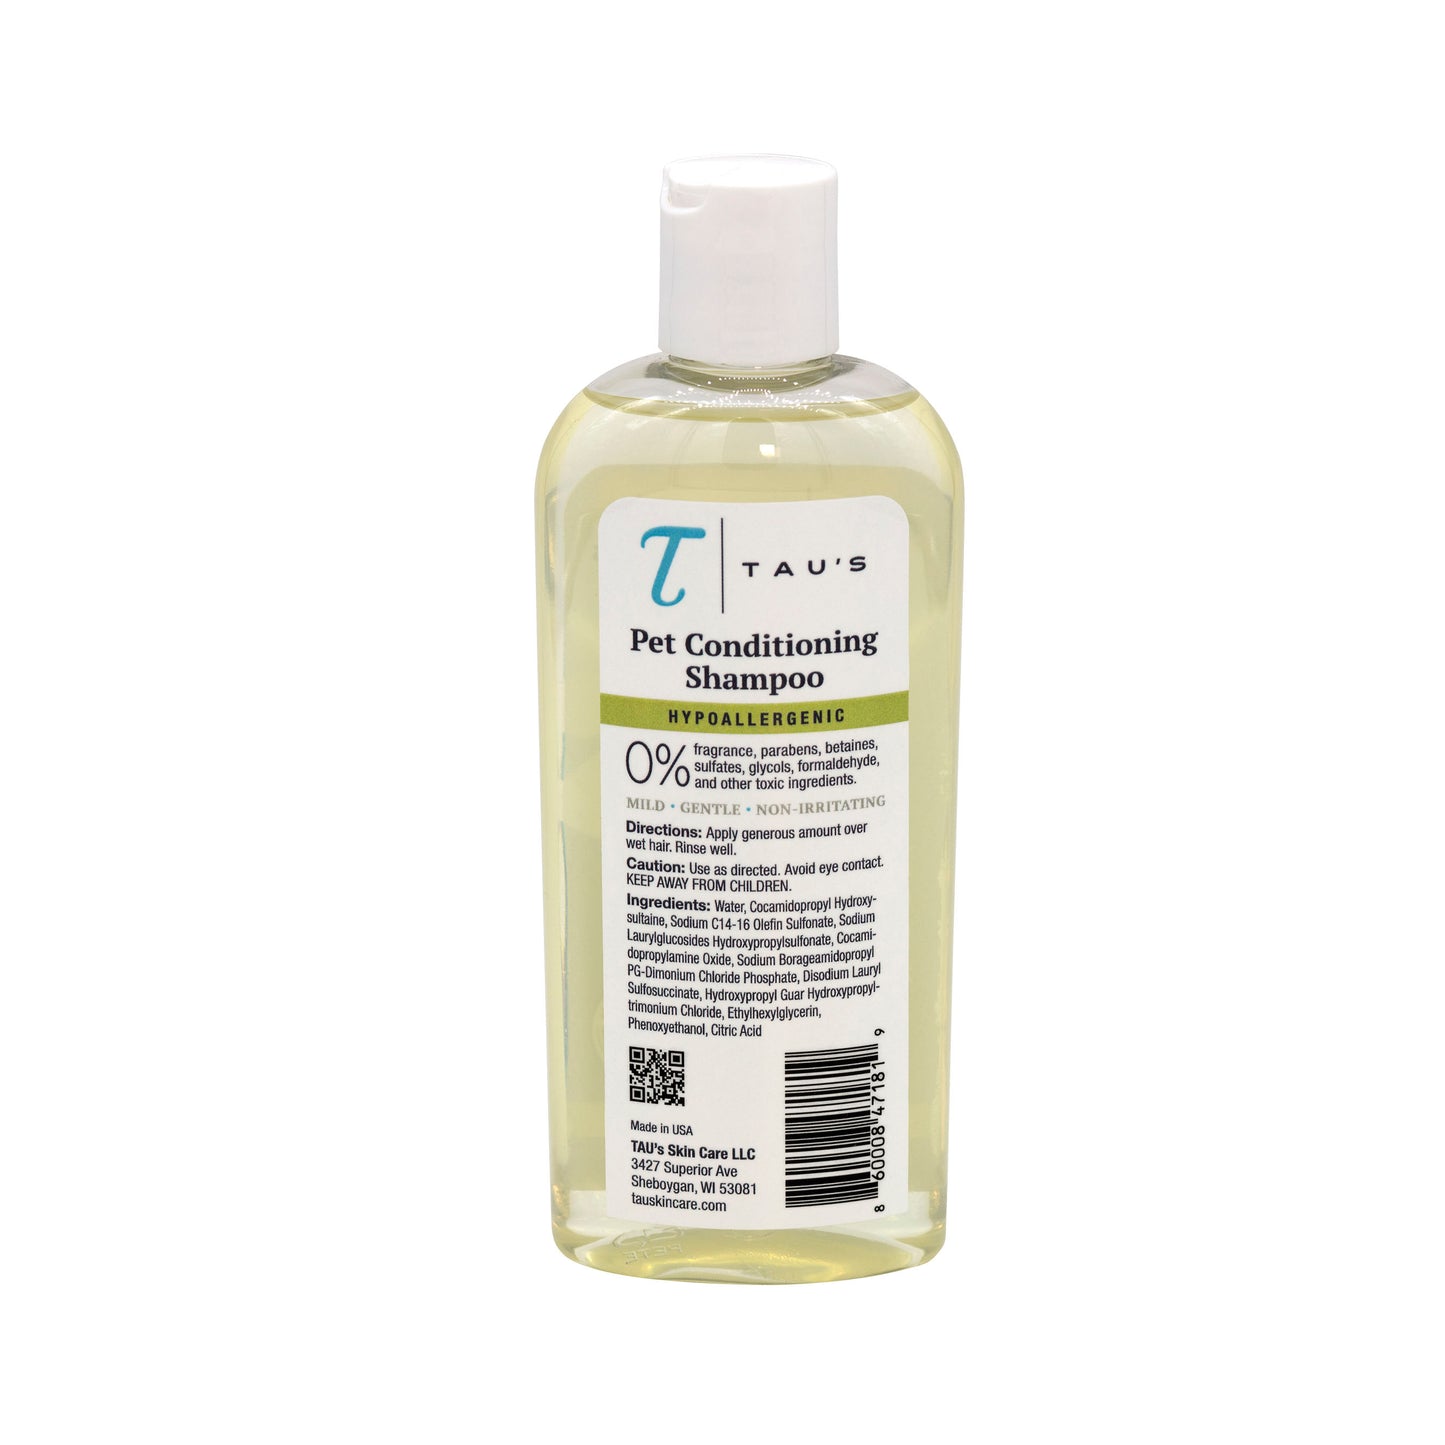 Hypoallergenic Pet Conditioning Shampoo by Dr. Tau